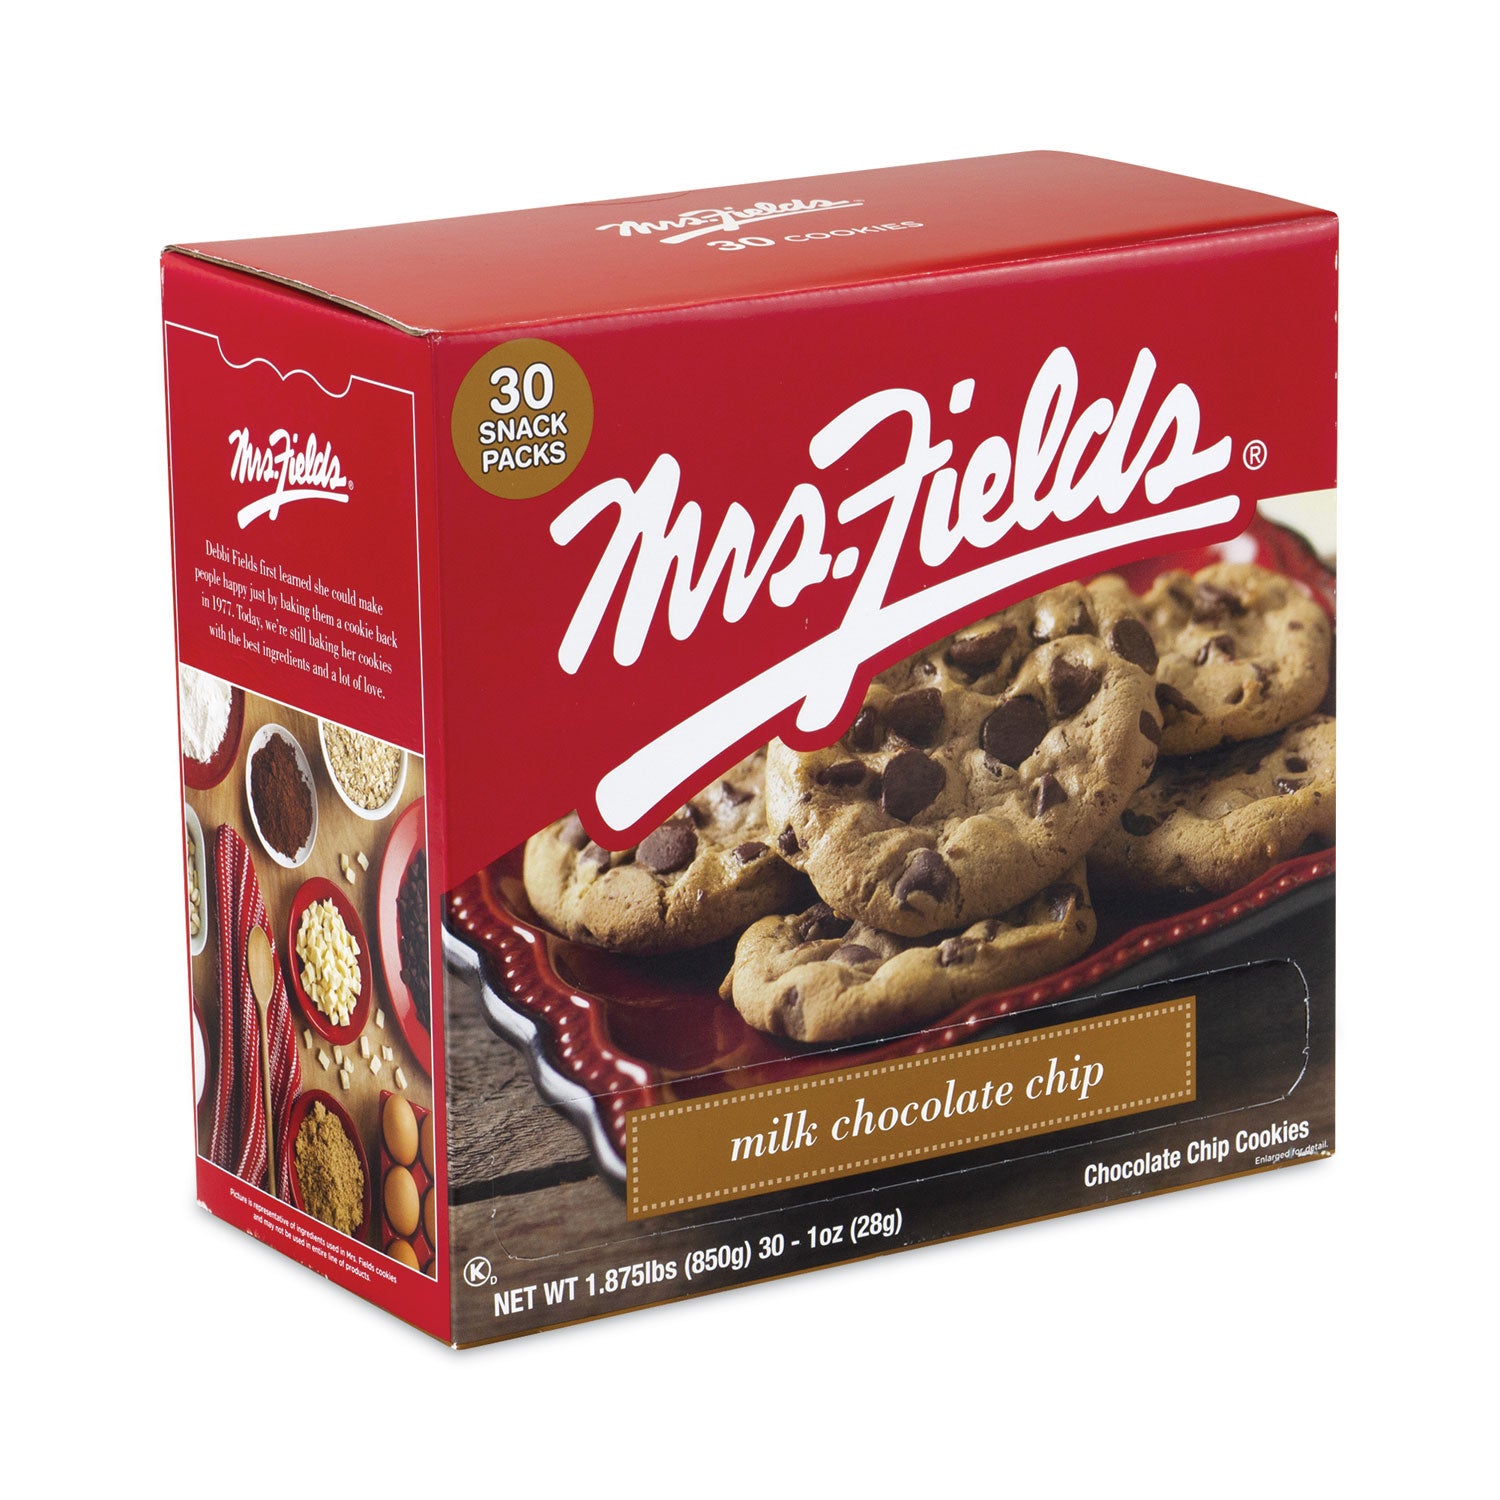 milk-chocolate-chip-cookies-1-oz-indidually-wrapped-pack-30-carton-ships-in-1-3-business-days_grr21200009 - 2